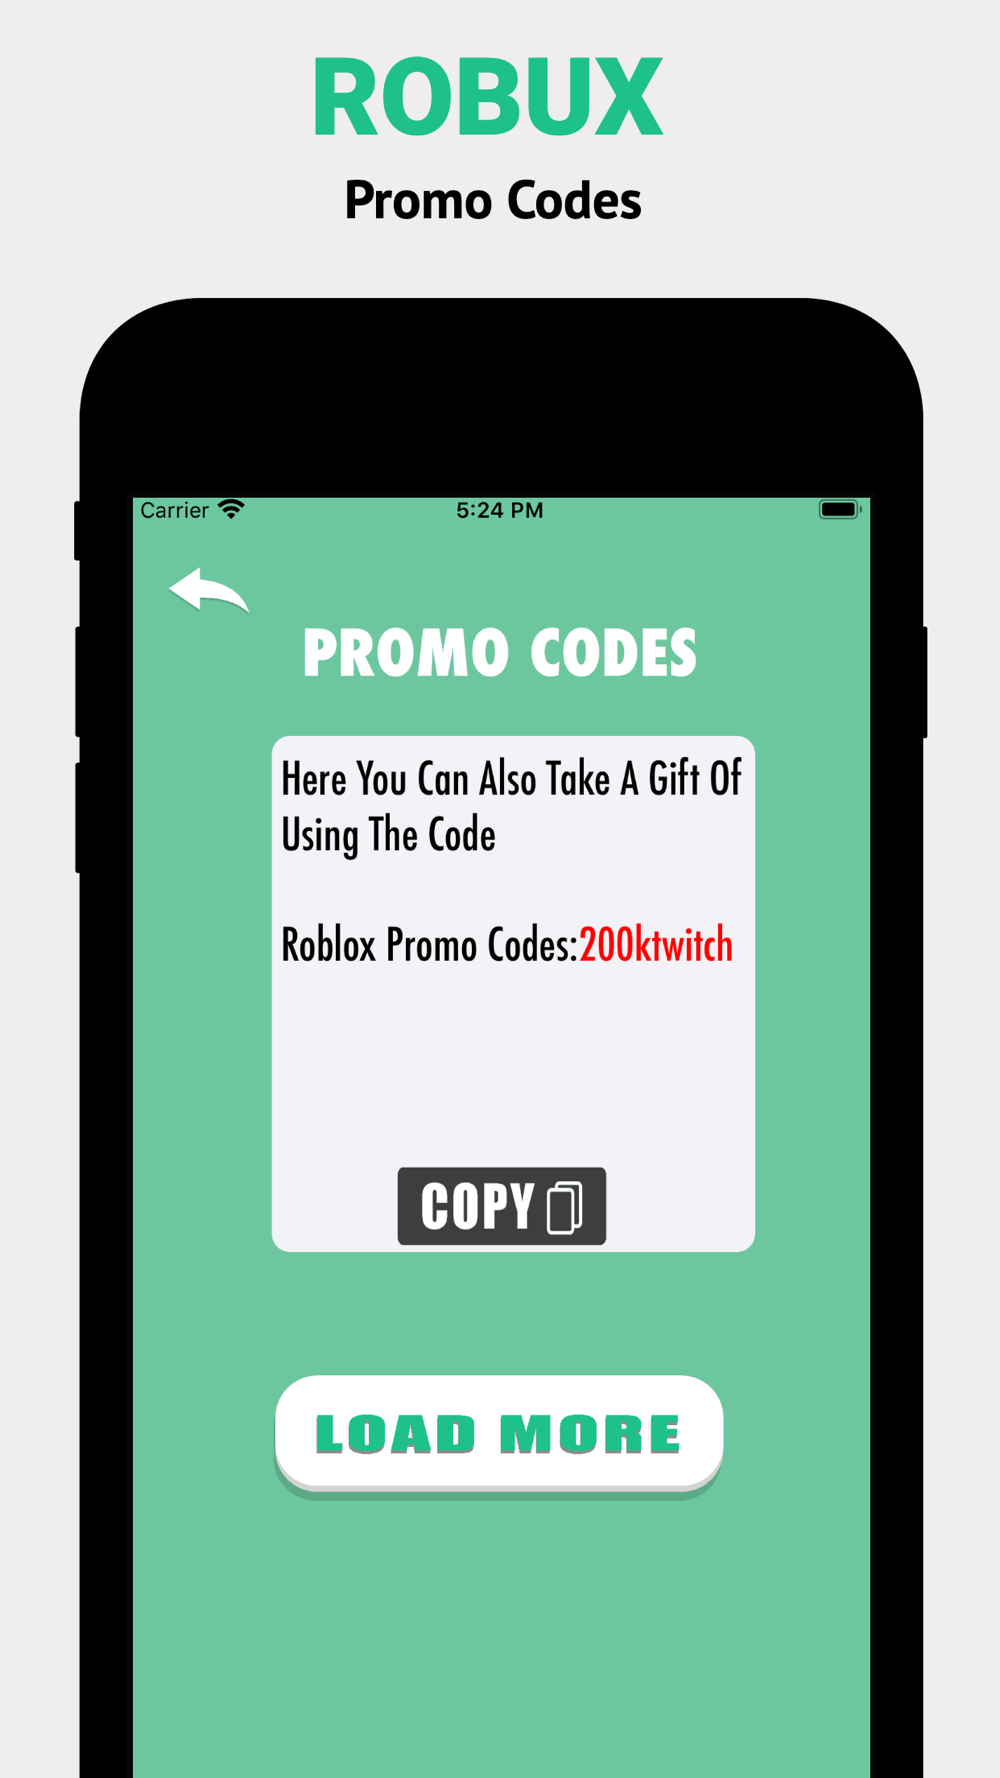 Robux Promo Codes For Roblox Free Download App For Iphone Steprimo Com - robux promo code in roblox